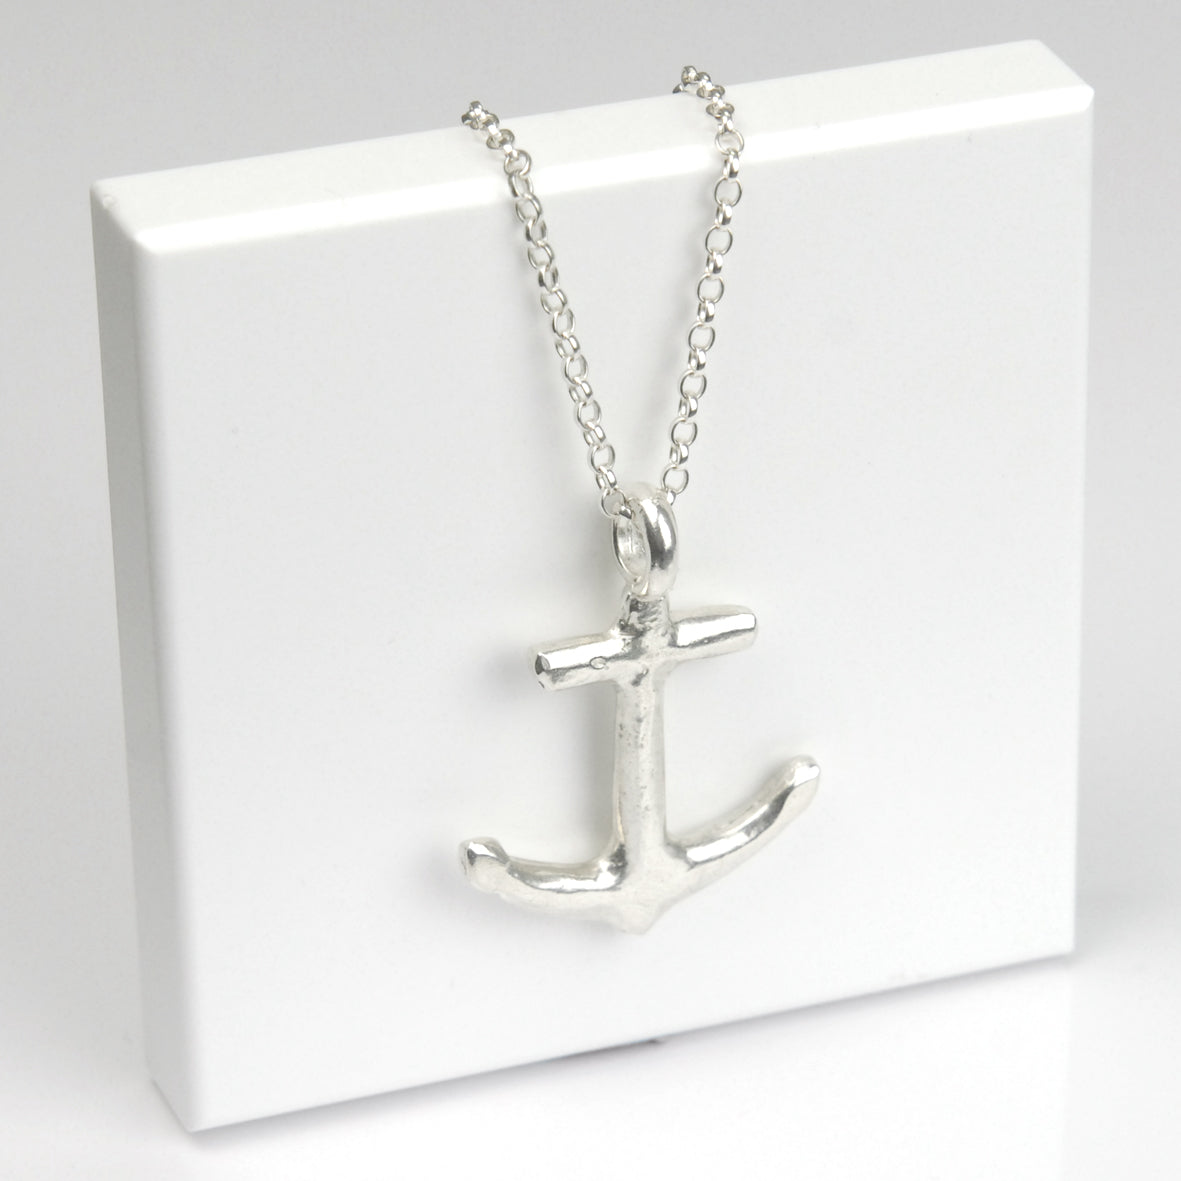 Belcher Chain with Large Chunky Anchor Charm